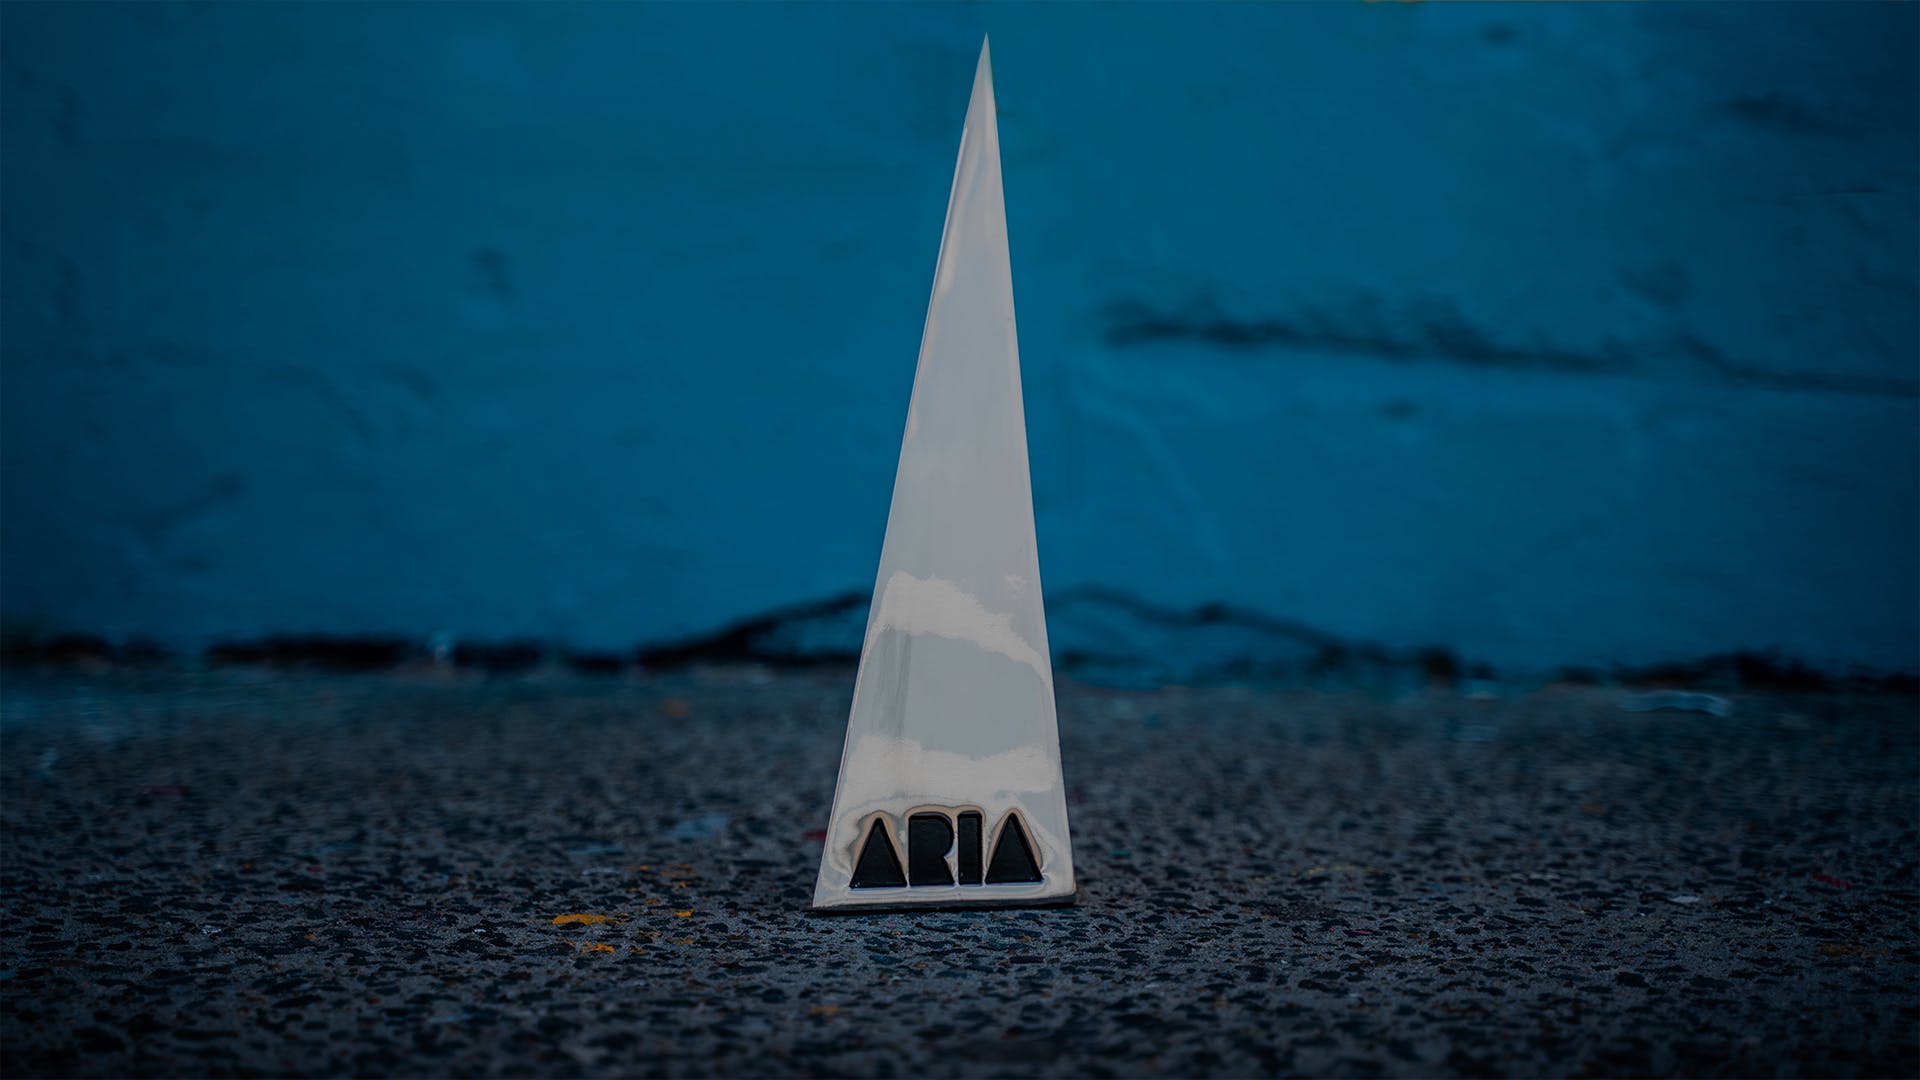 ARIA CEO celebrates ‘amazing results’ of 2021 ARIA Awards with 1.7 million YouTube views